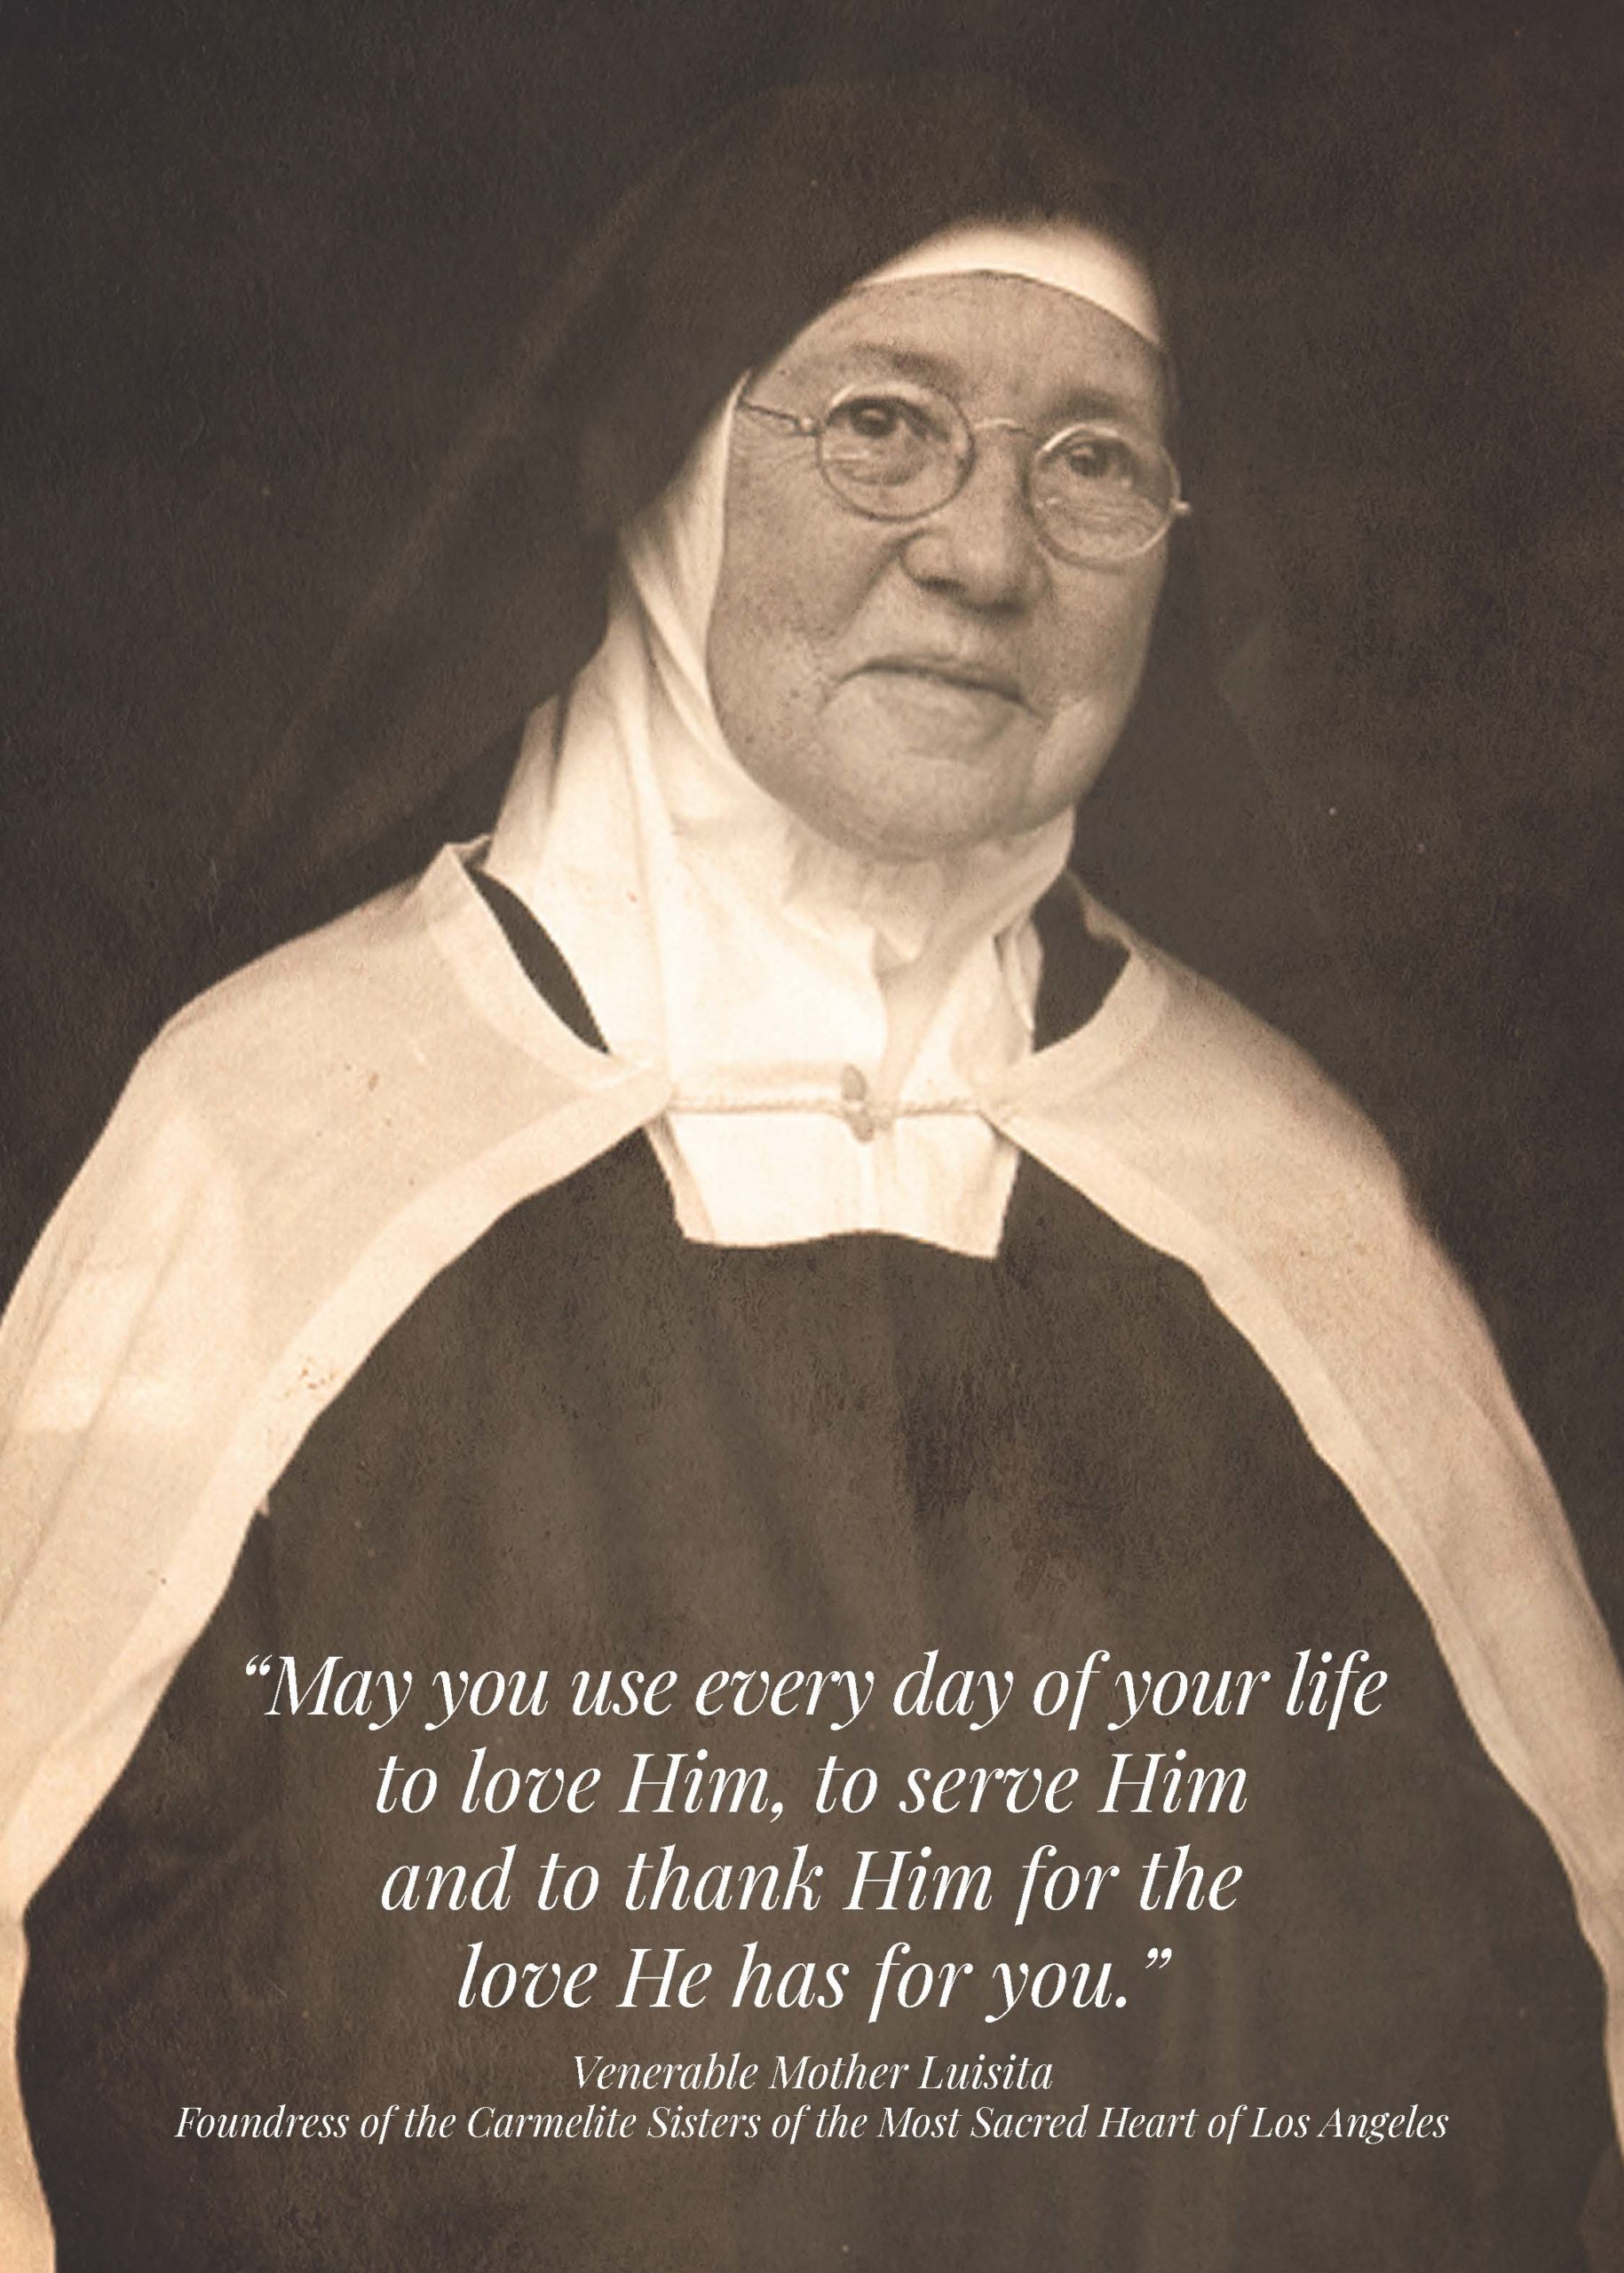 “May you use every day of your life to love Him, to serve Him and to thank Him for the love He has for you.” Venerable Mother Luisita. Foundress of the Carmelite Sisters of the Most Sacred Heart of Los Angeles. Prayer Card Cover